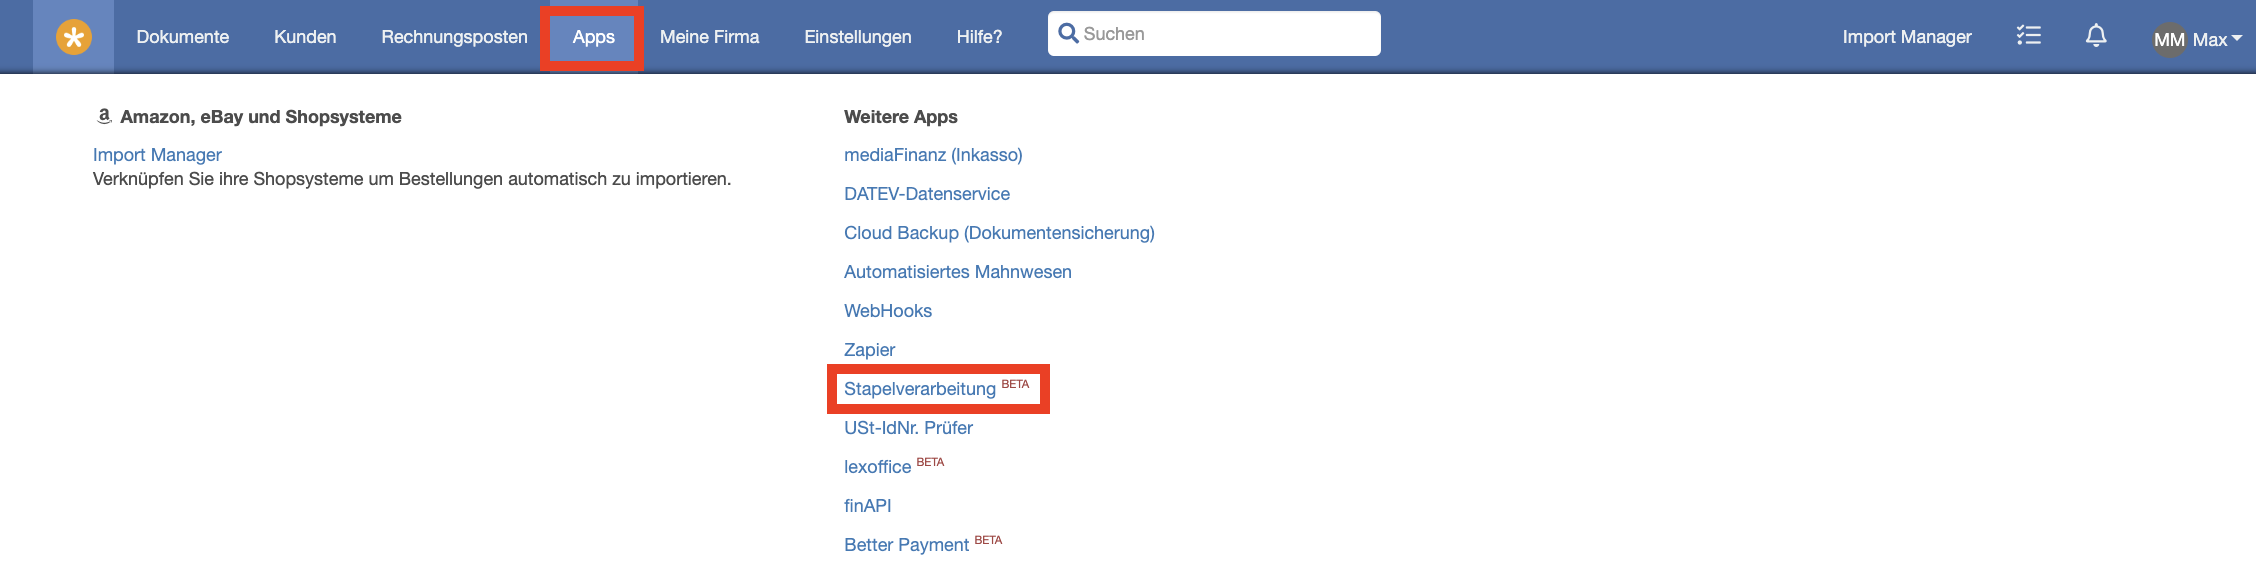 Apps_Stapelverarbeitung.png